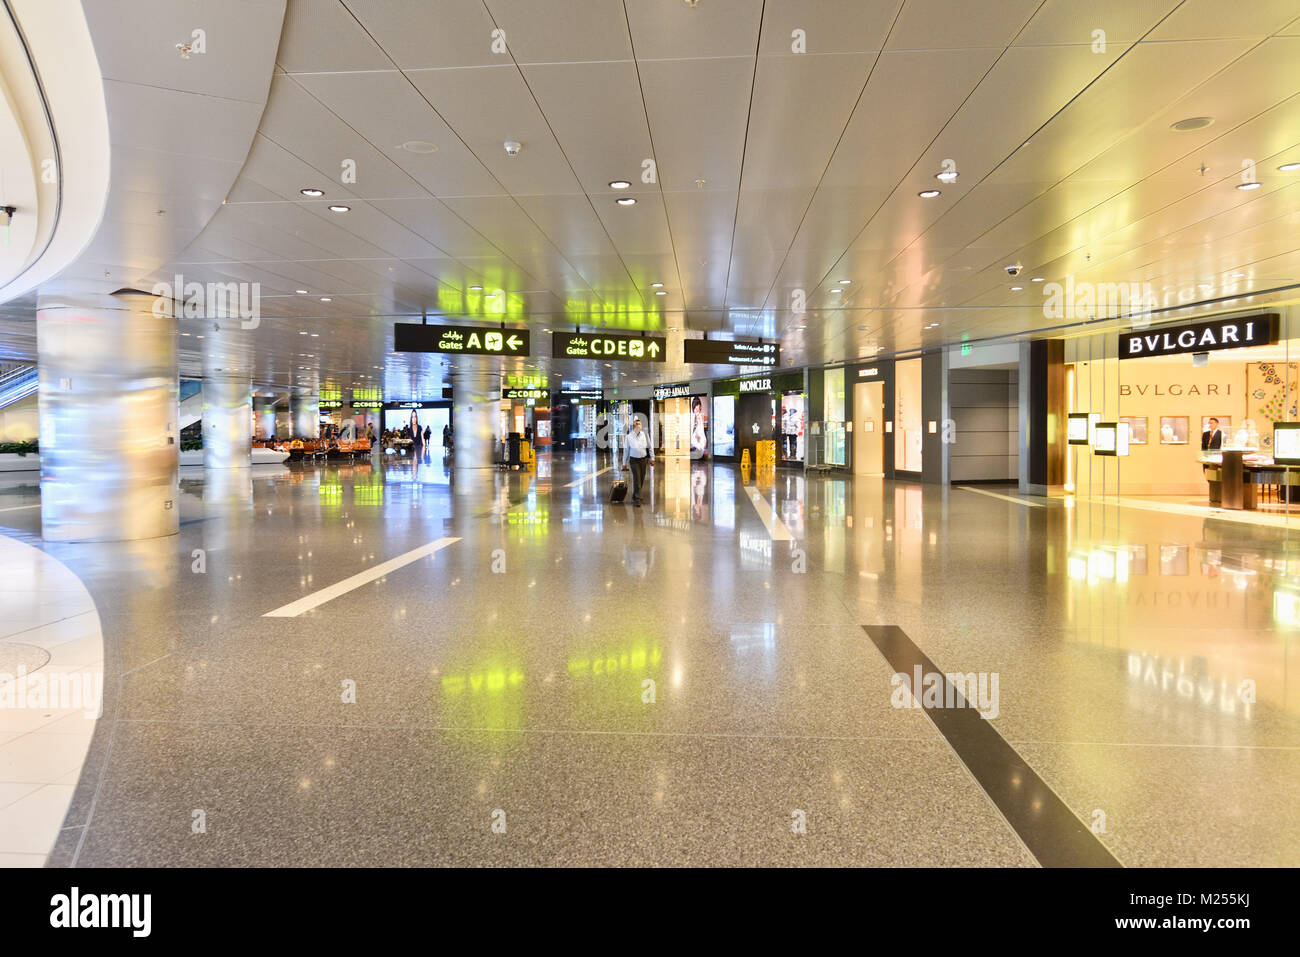 Qatar, Doha, Hamad International Airport. In the transit area, a traveler walks among the premium branded shops within the airport's shopping area. Stock Photo